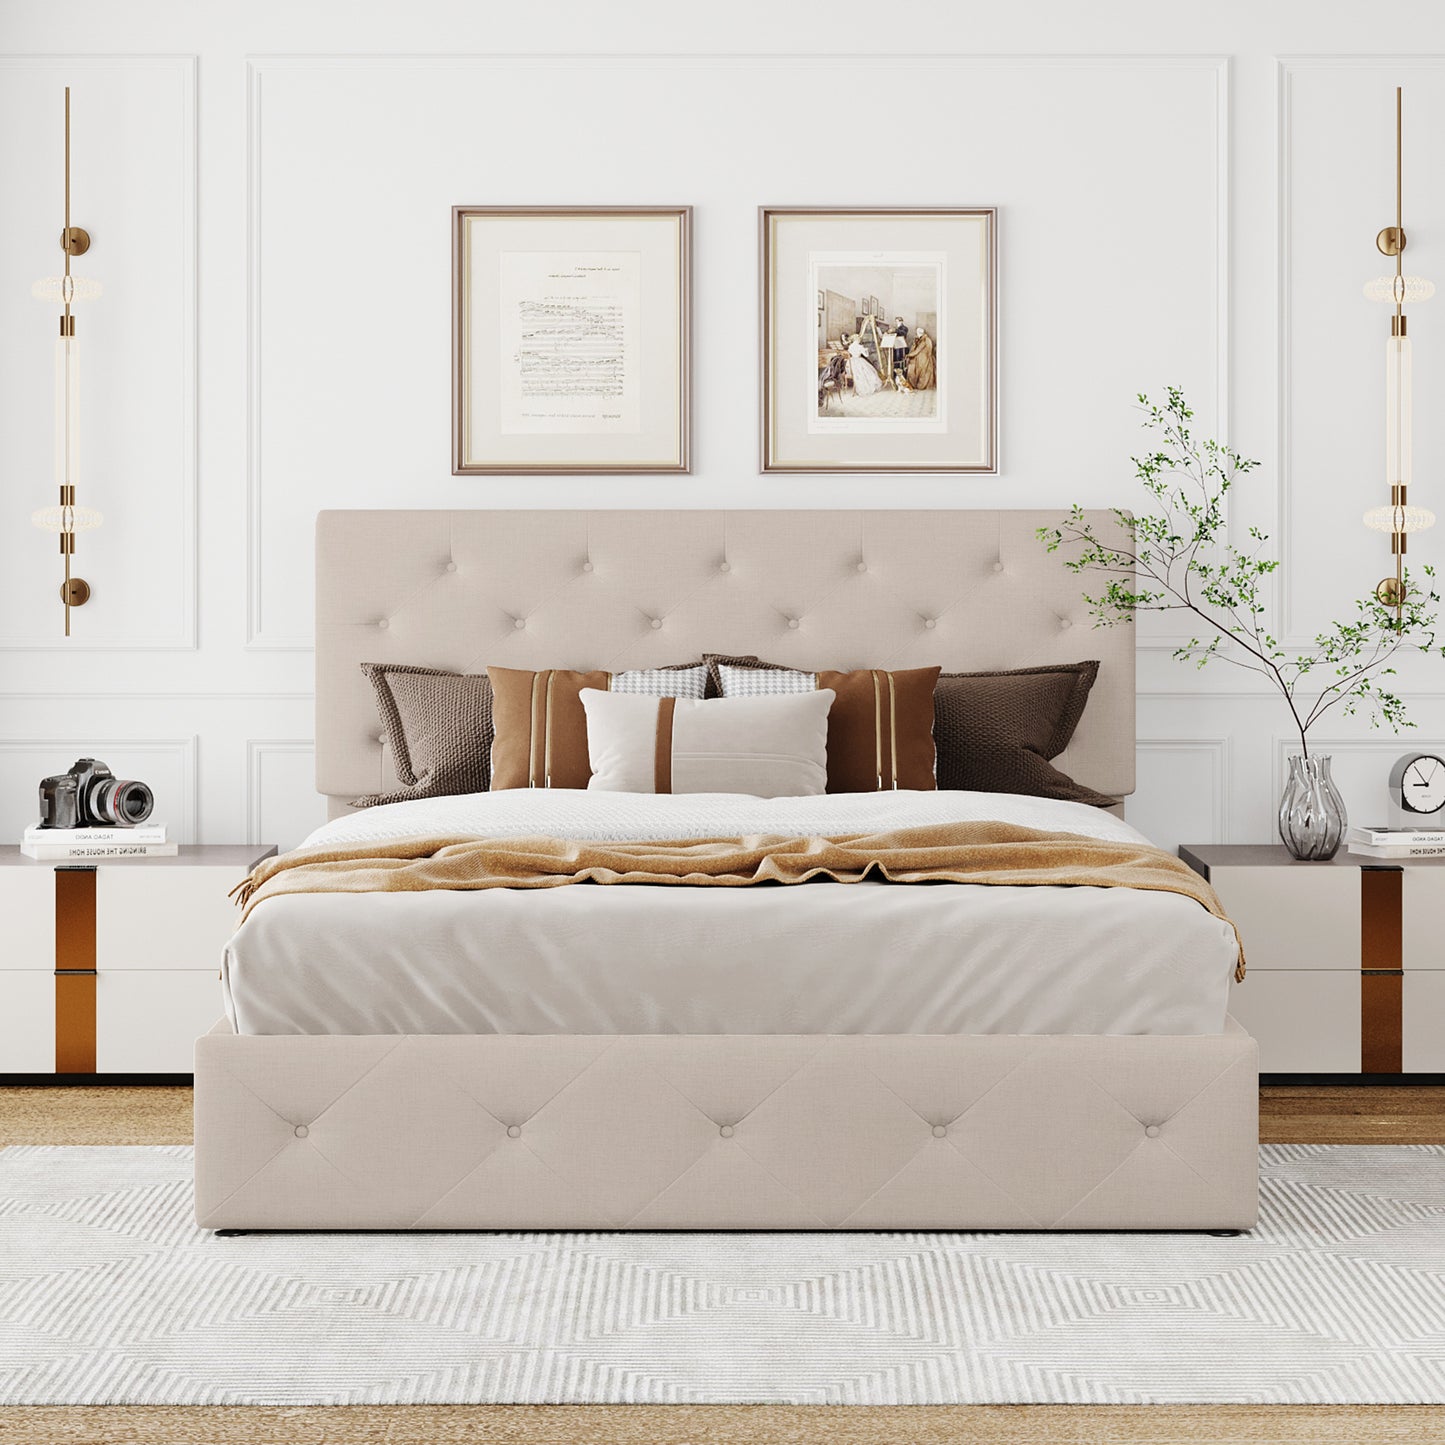 Queen size Upholstered Platform bed with a Hydraulic Storage System - Beige